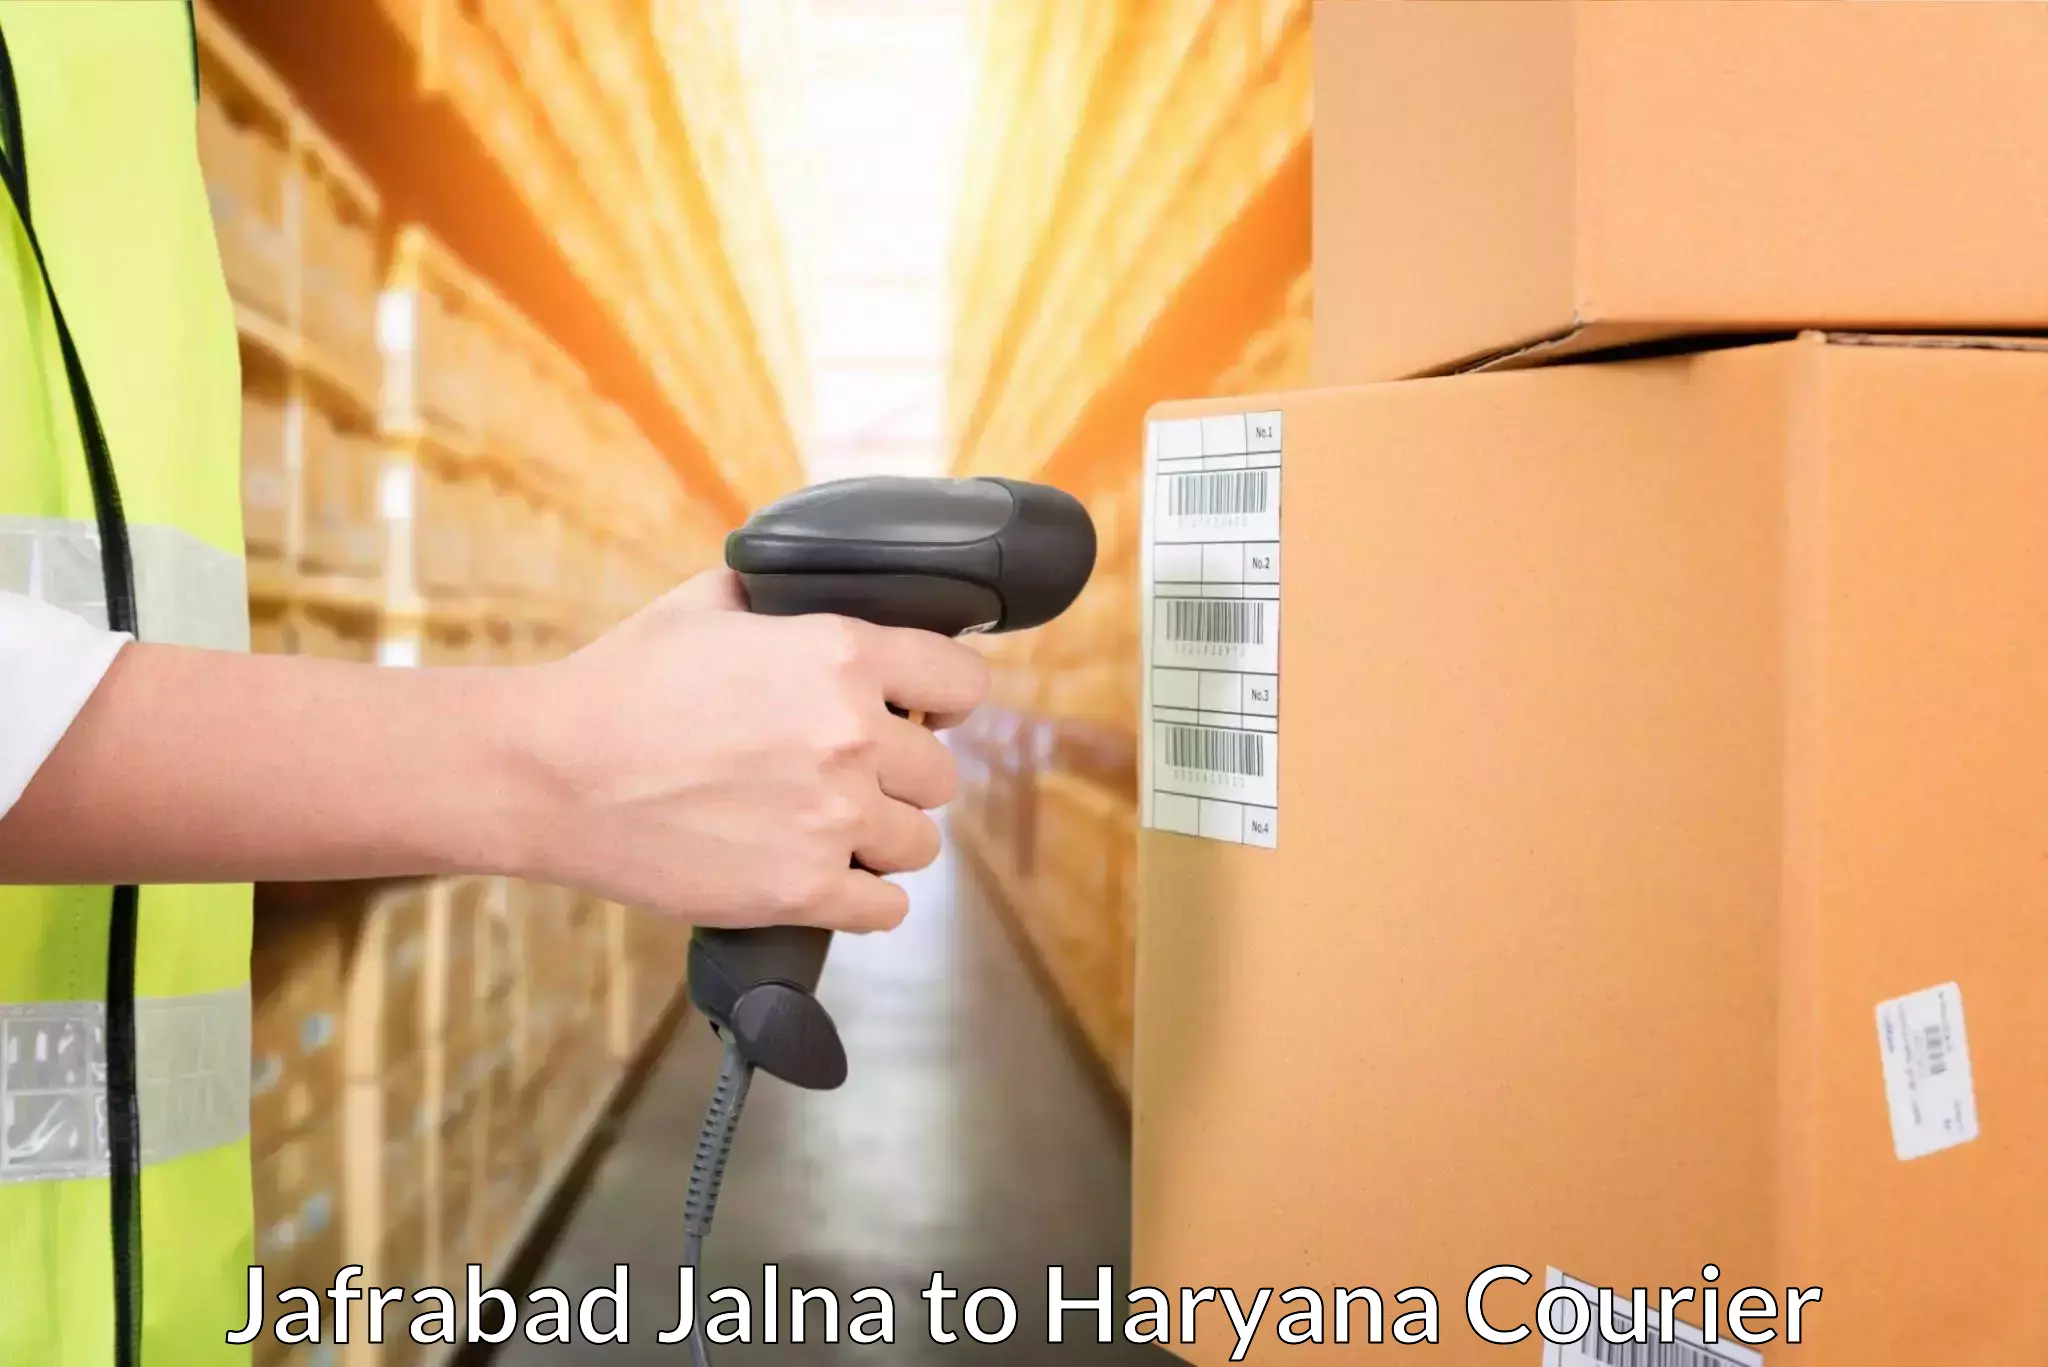 Same-day delivery solutions Jafrabad Jalna to Haryana